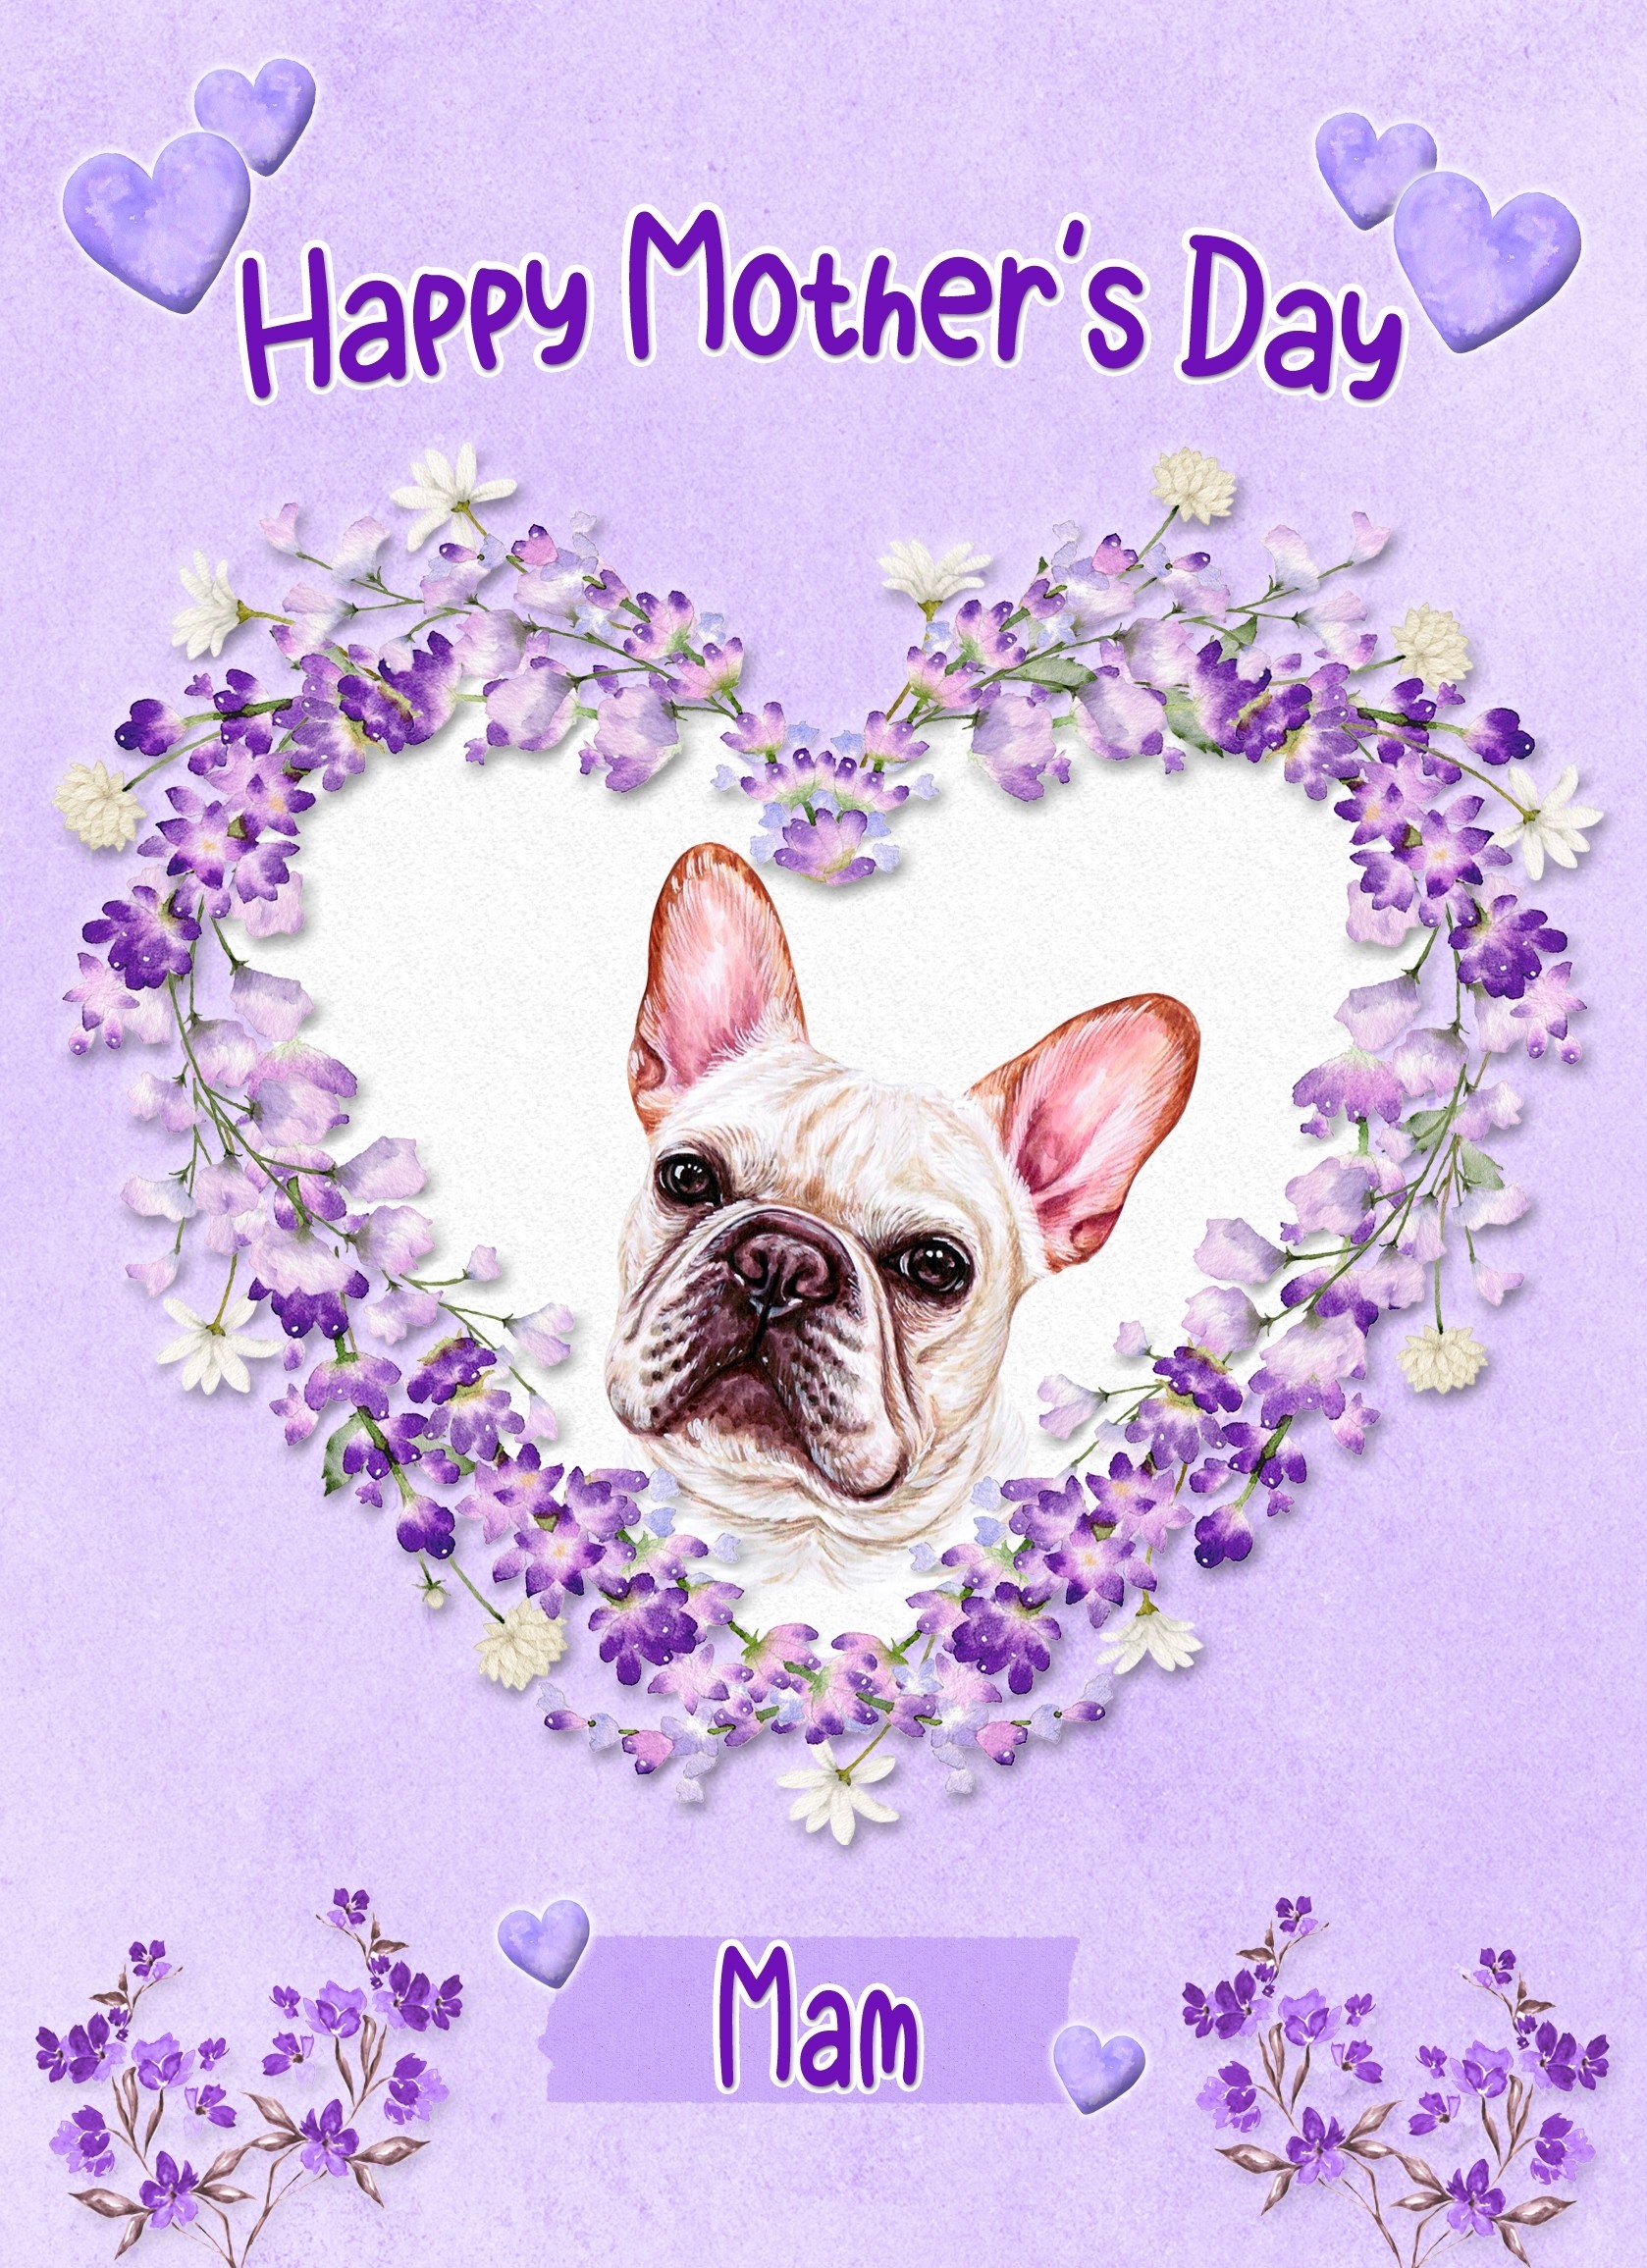 French Bulldog Dog Mothers Day Card (Happy Mothers, Mam)